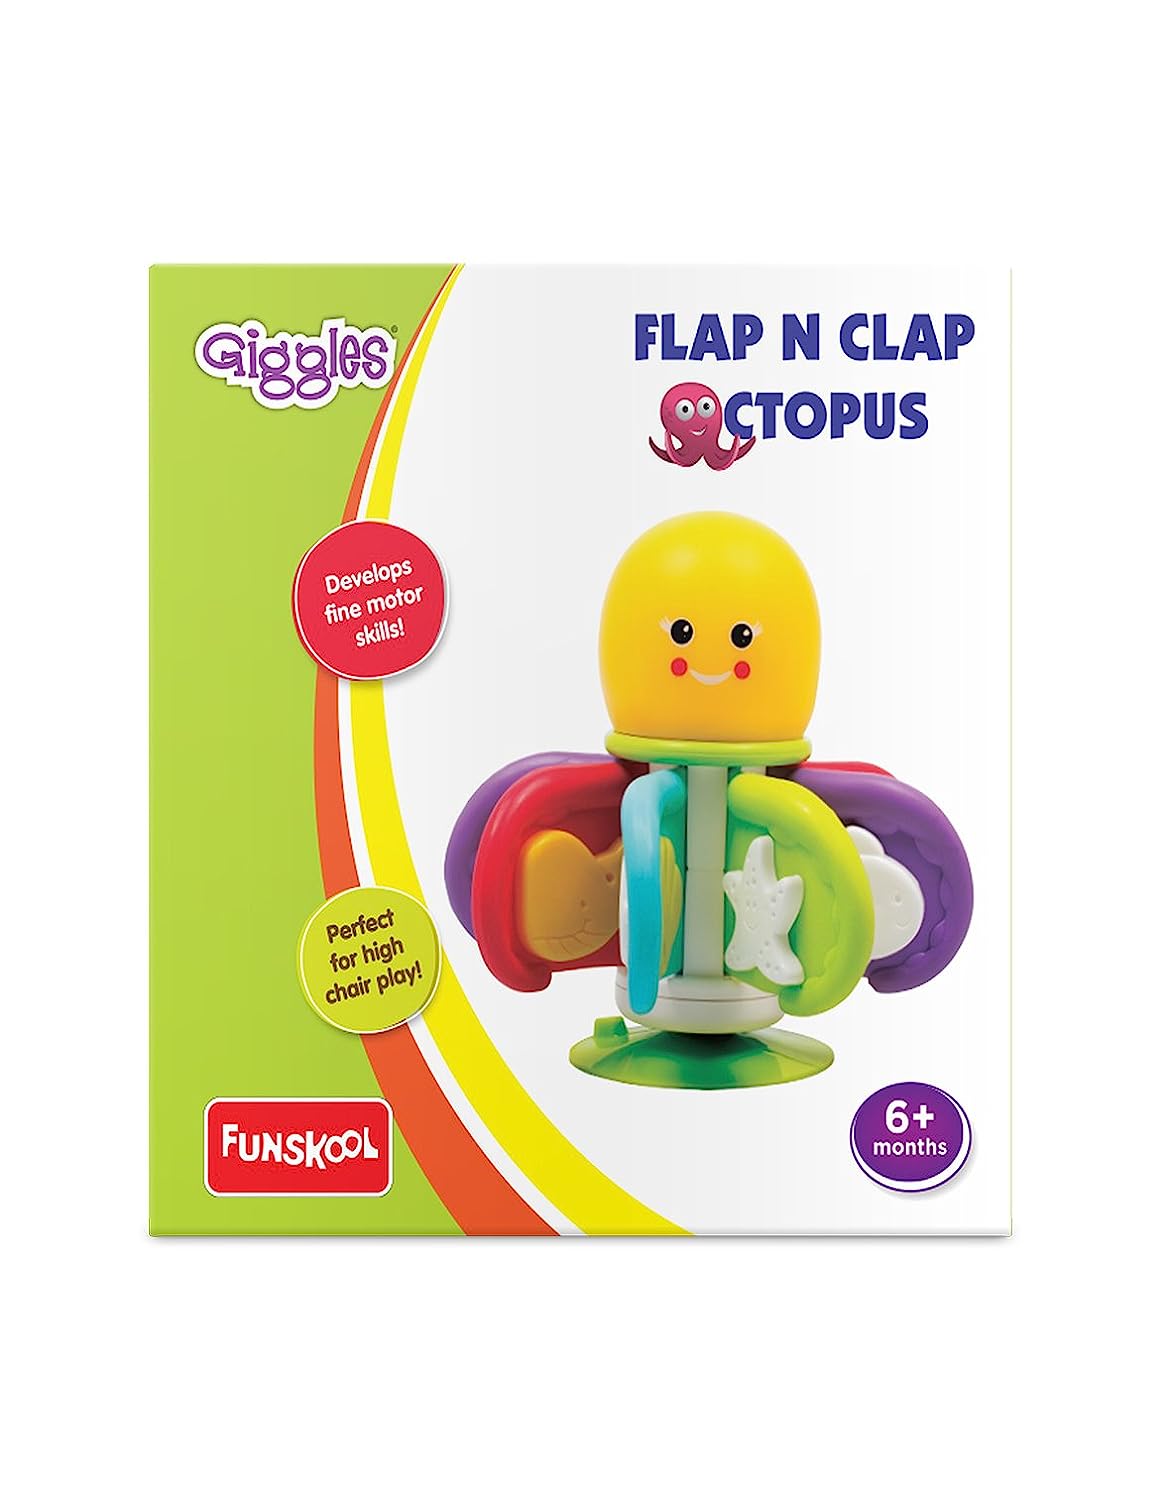 Giggles Flap N Clap Octopus - Multicolour High Chair Activity Toy for Developing Motor Skills - 6 Months & Above